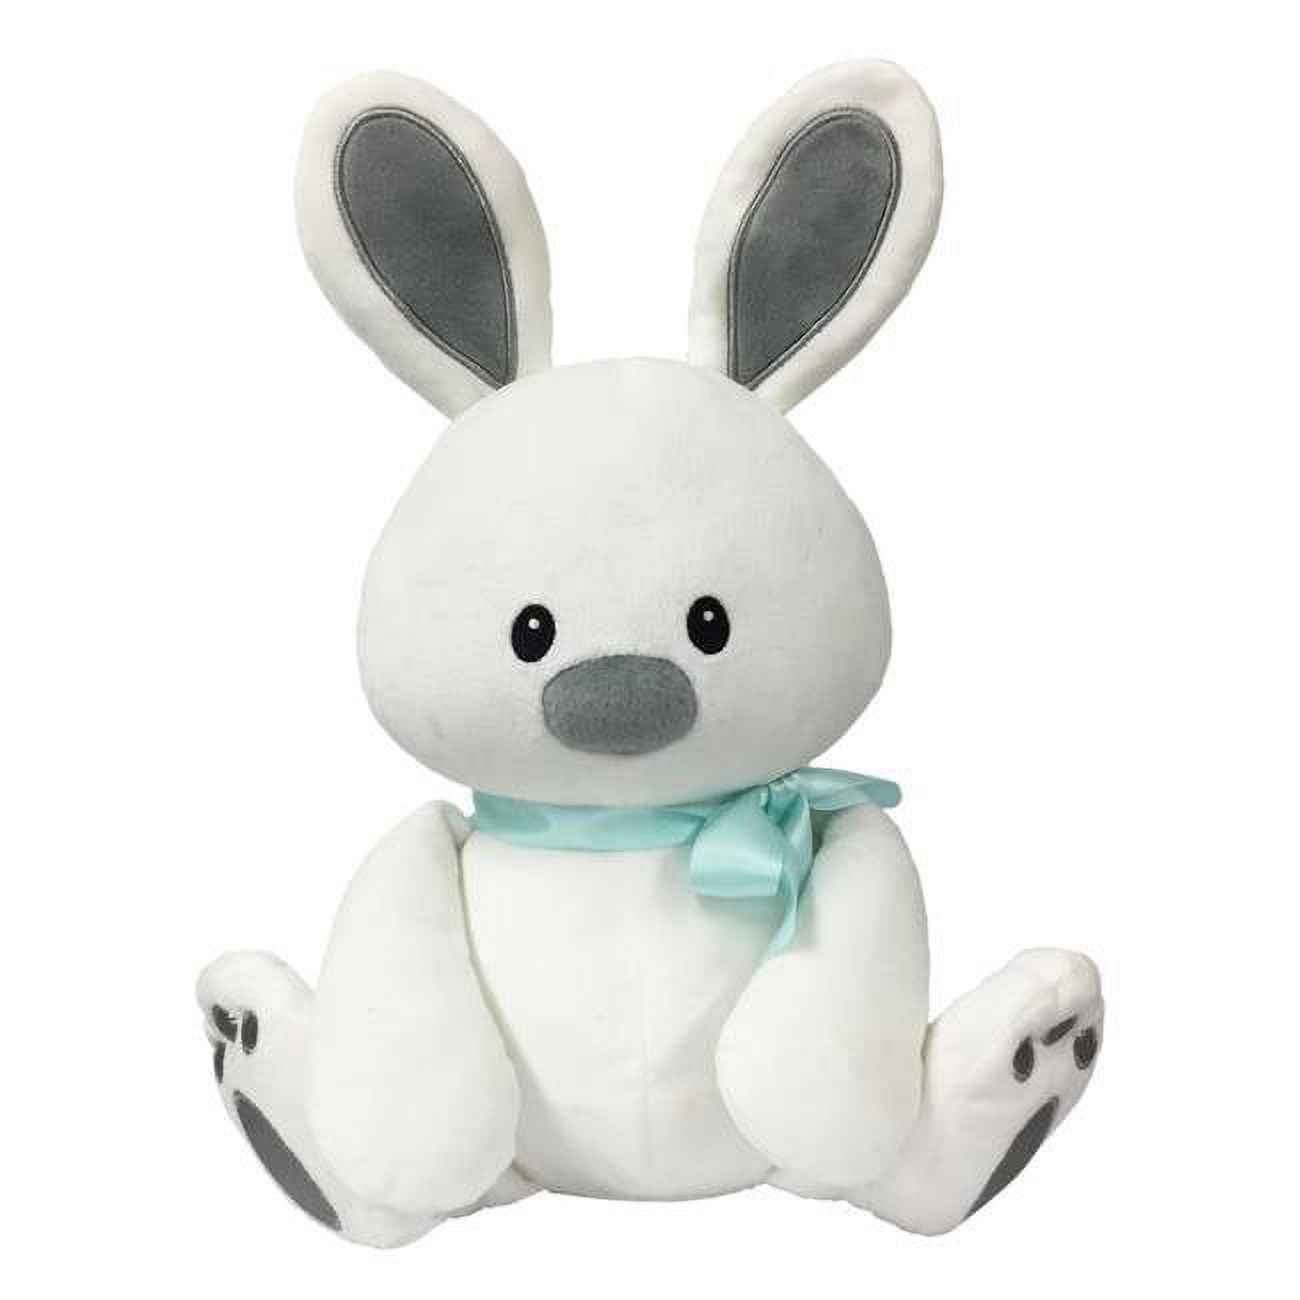 90033 Sweet Dreams Furry Friends Cloud Bunny With Teal Ribbon For 3 Plus Years Old Children